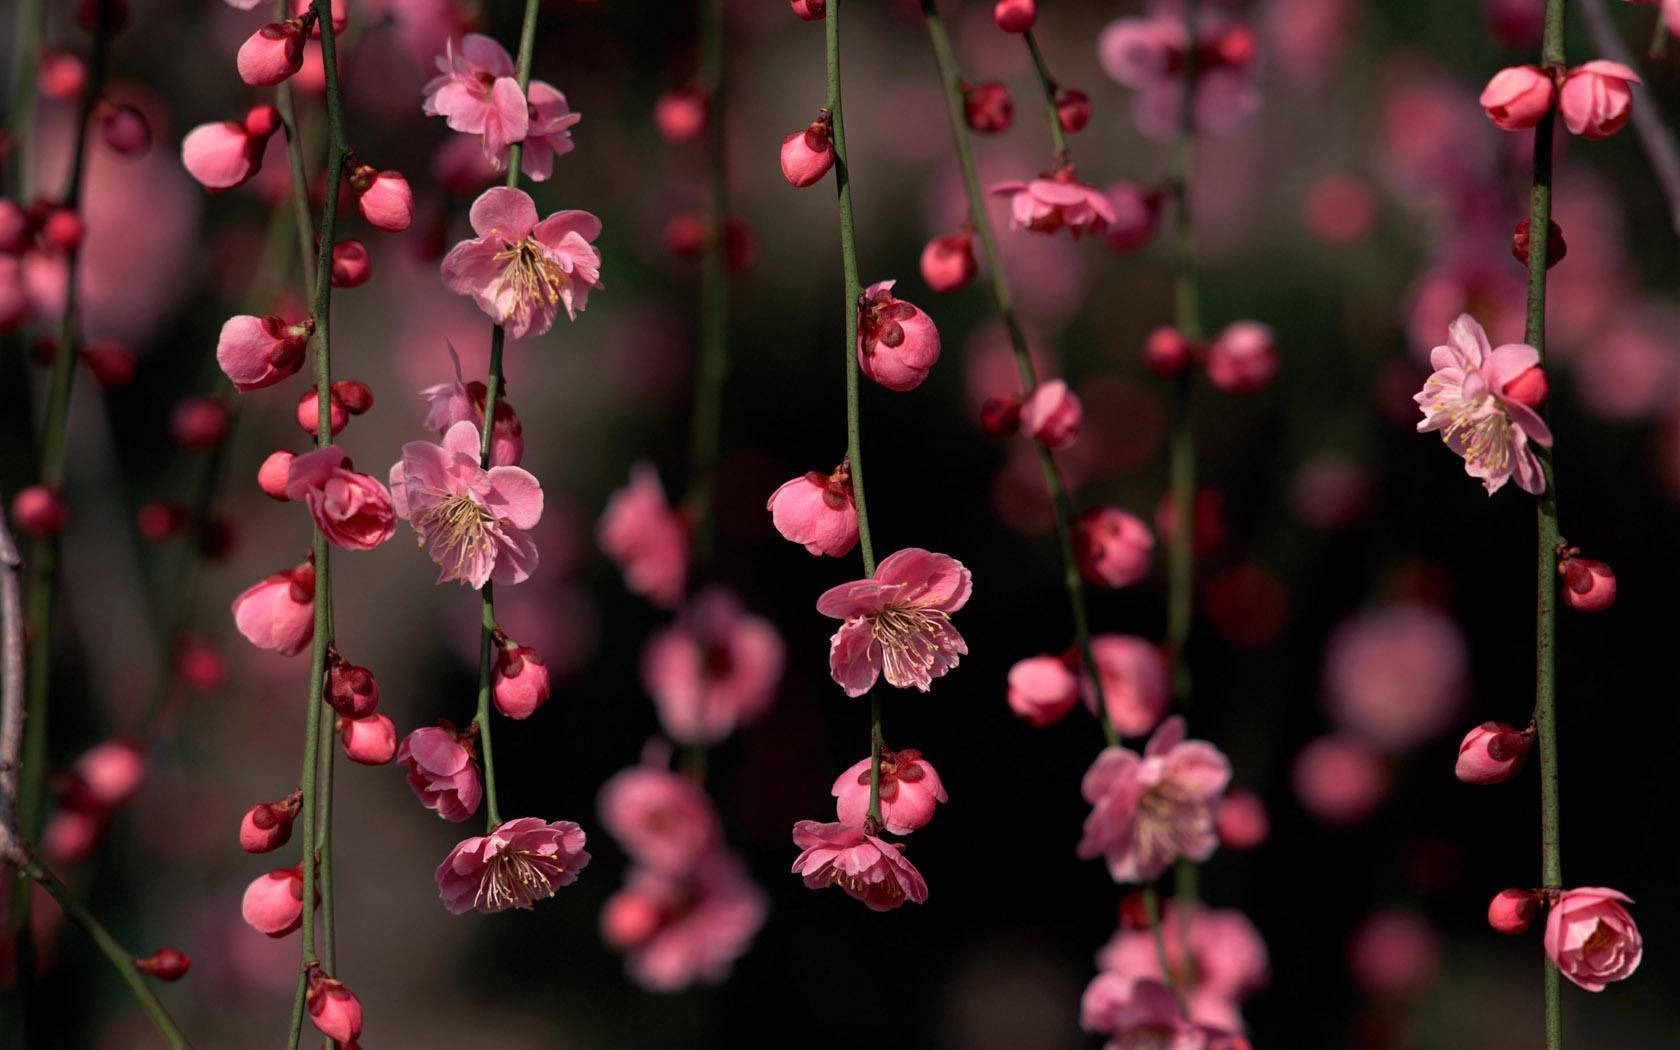 Hang onto the beauty of spring with flowers on your desktop Wallpaper